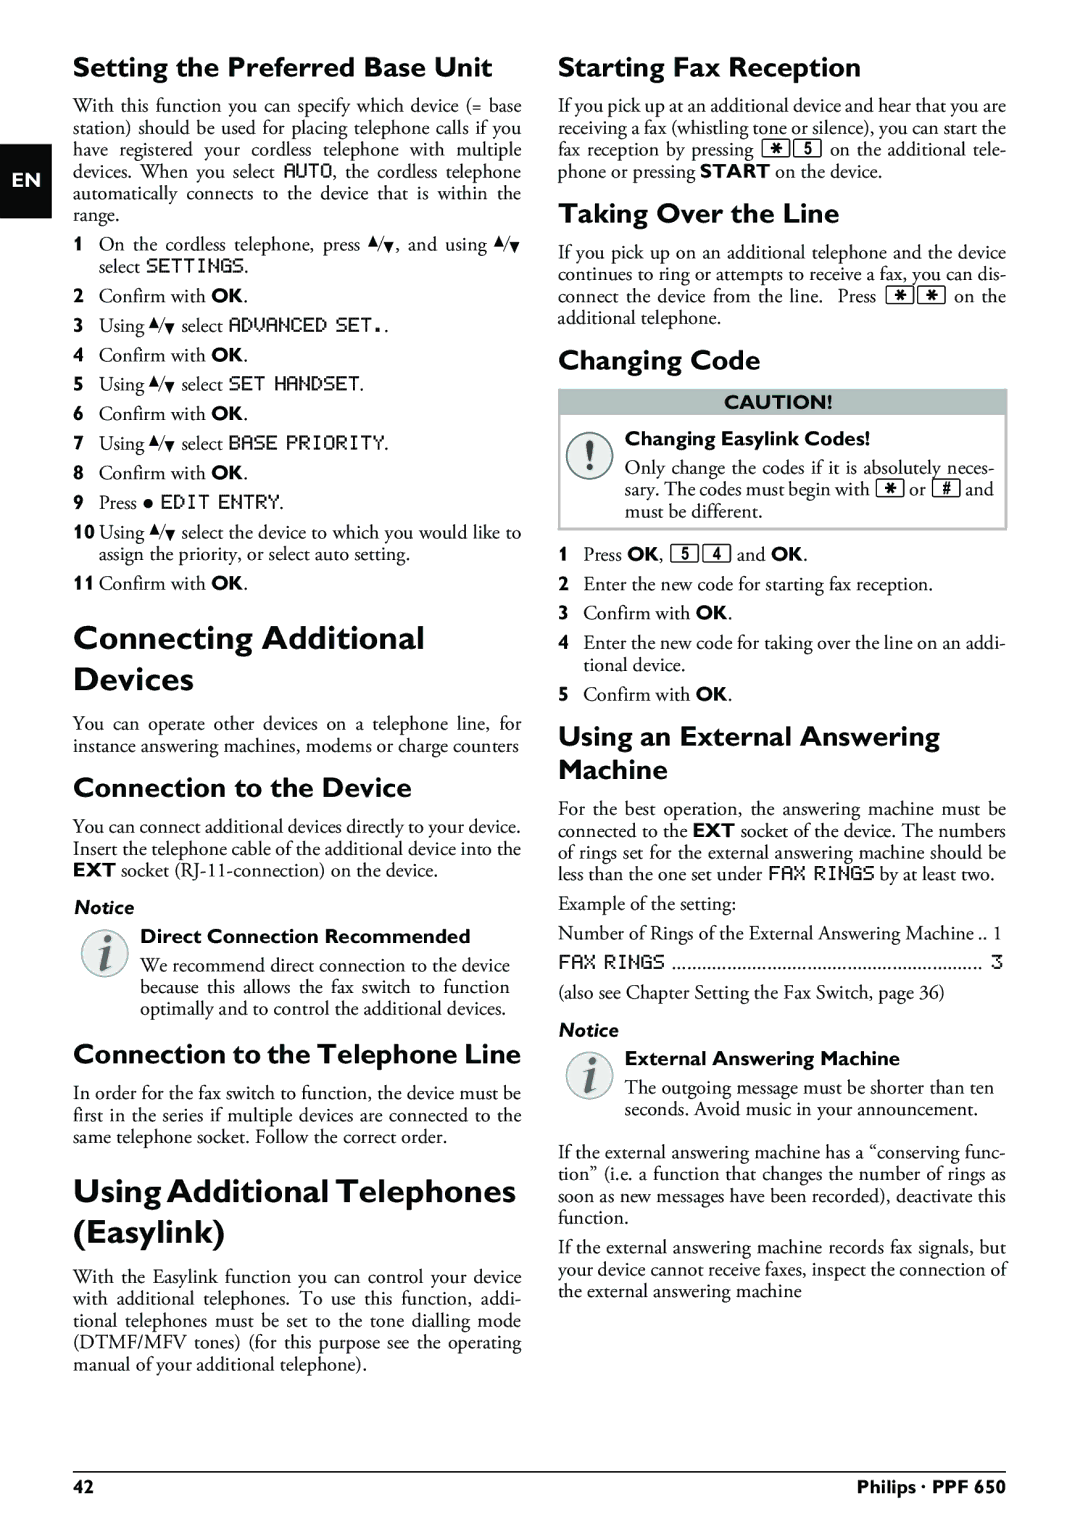 Philips PPF 650 user manual Connecting Additional Devices, Using Additional Telephones Easylink 